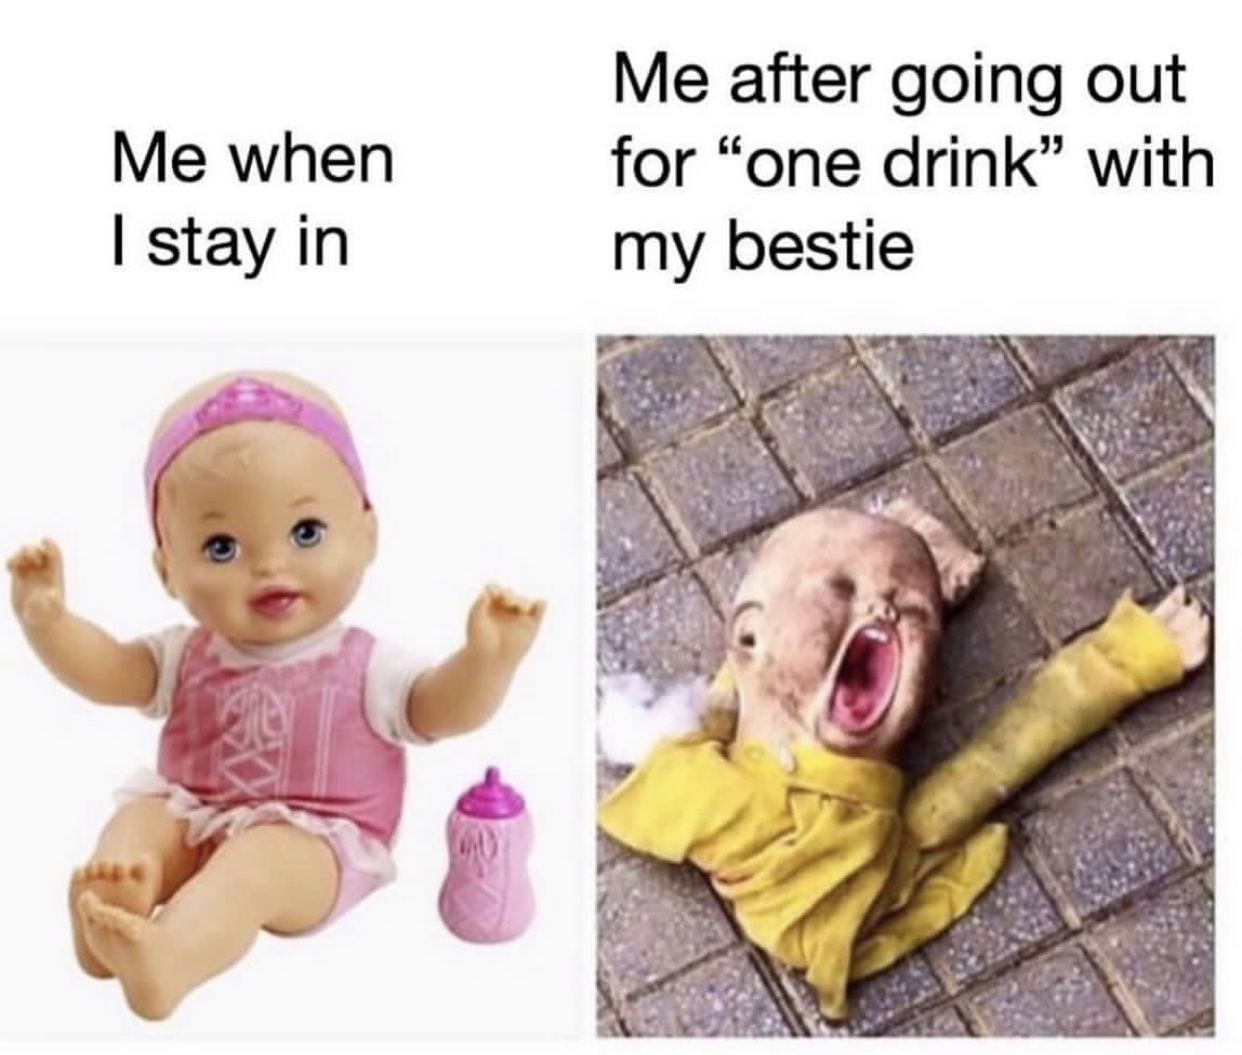 meme me at the beginning of the year vs now - Me when I stay in Me after going out for "one drink" with my bestie